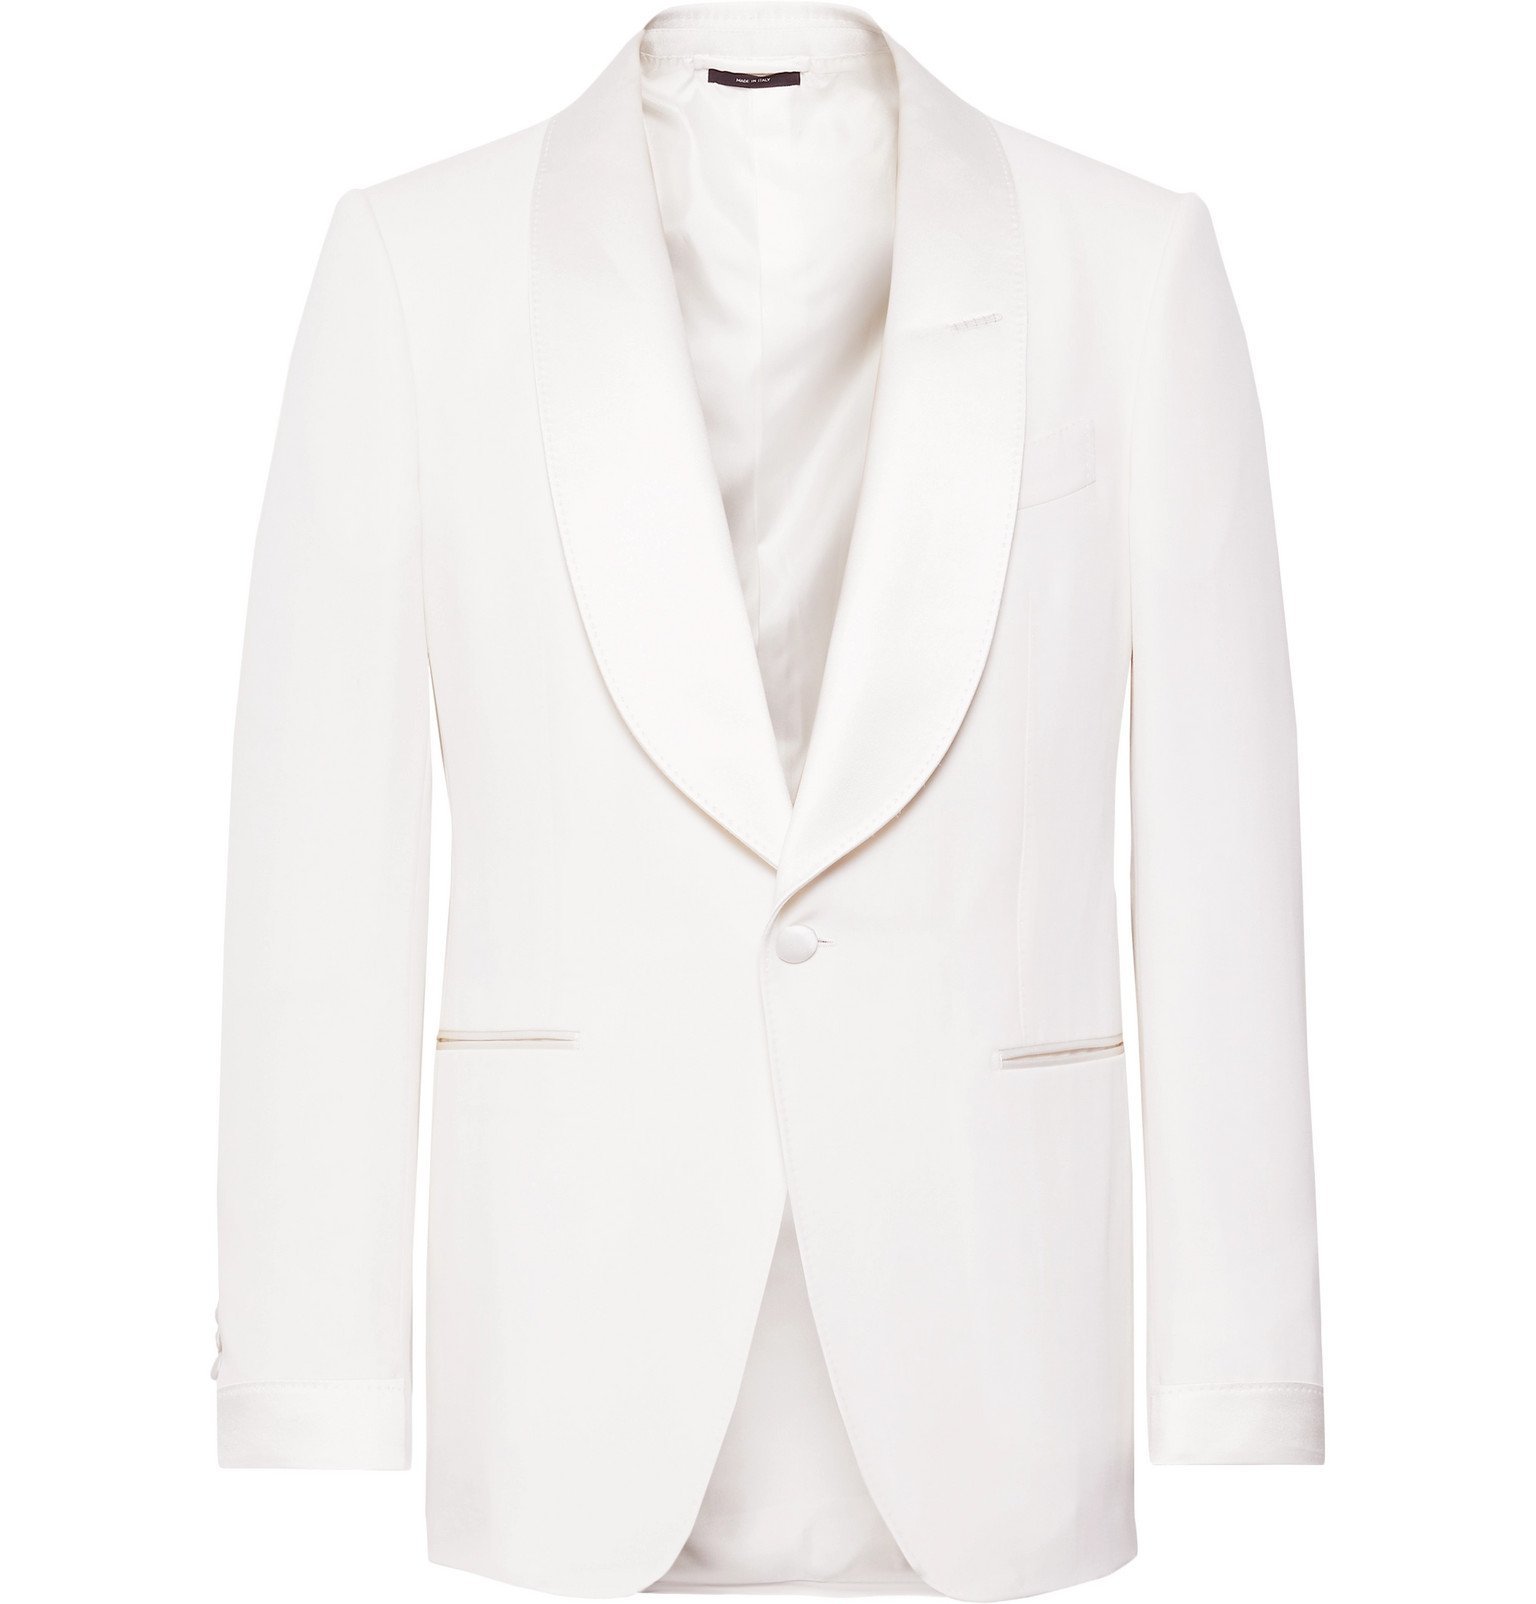 TOM FORD - Cream Shelton Slim-Fit Satin-Trimmed Wool and Mohair-Blend ...